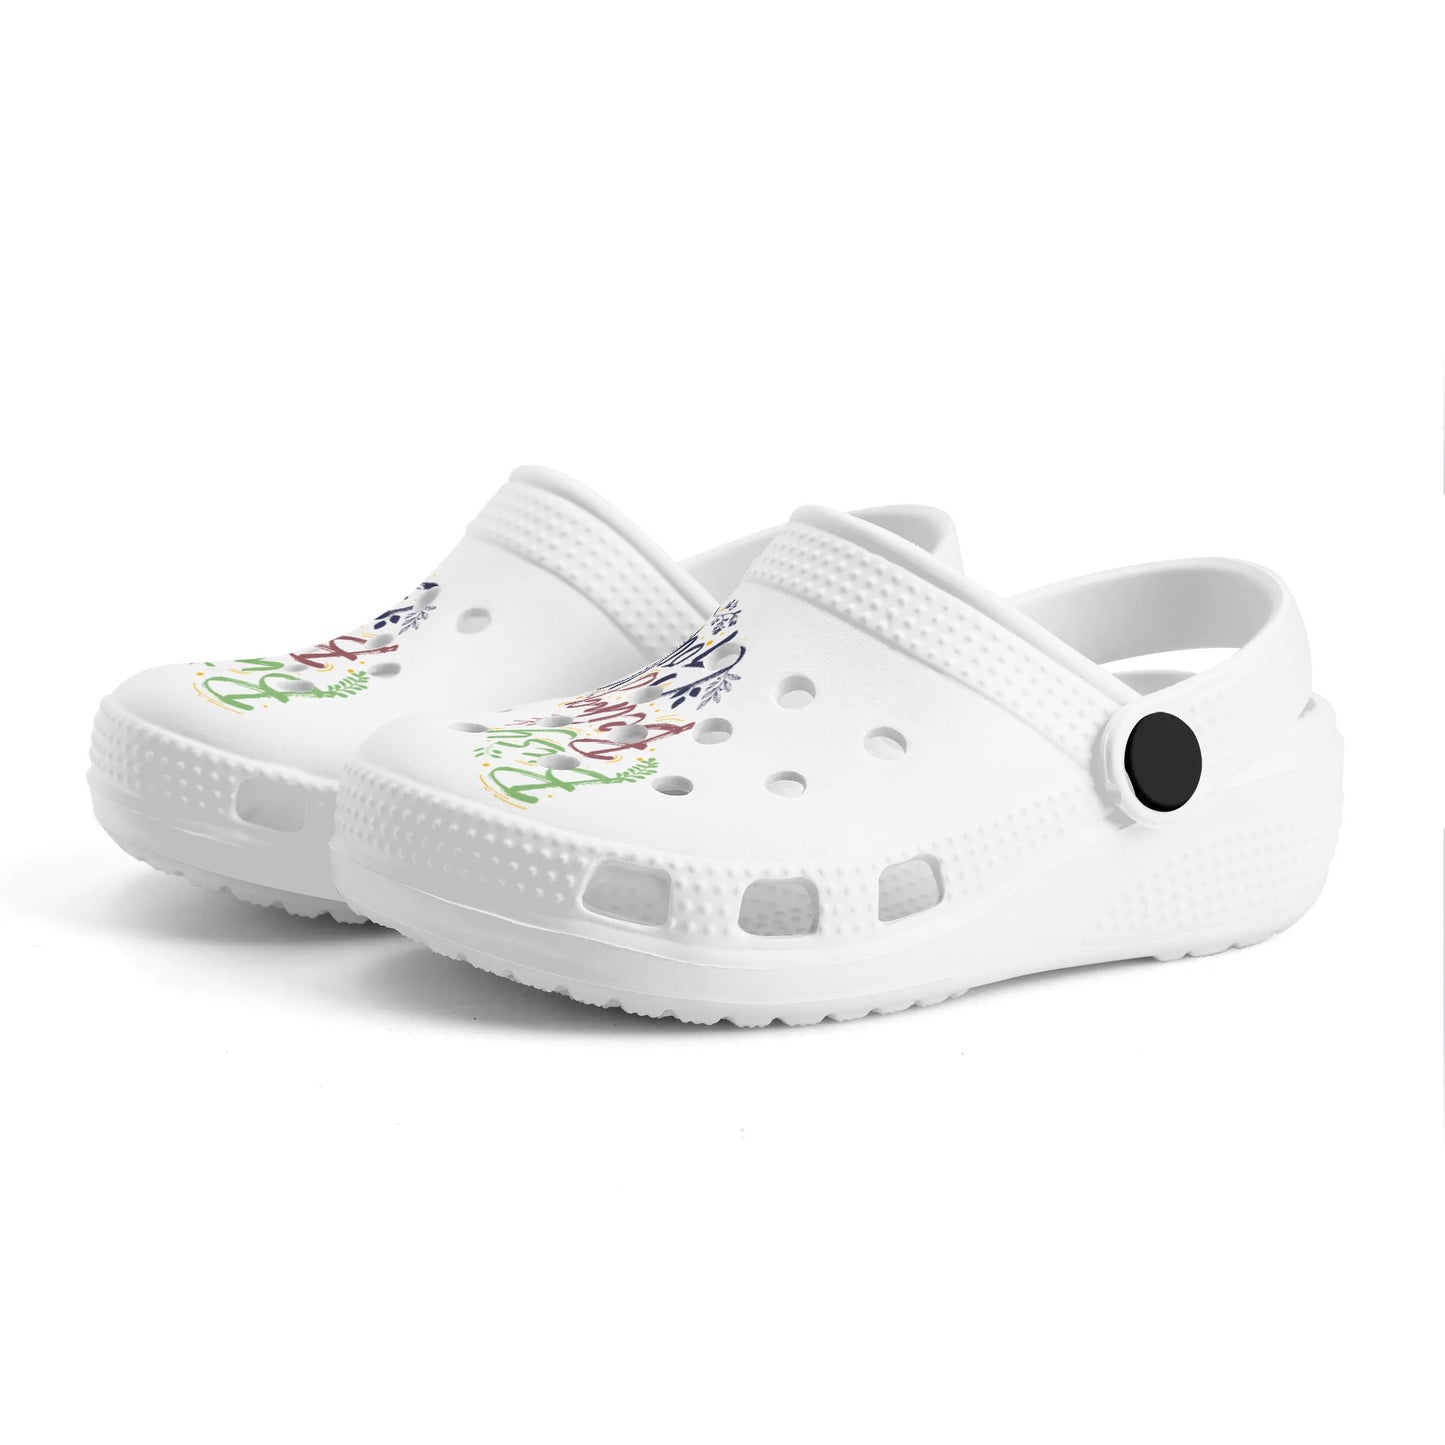 Busy Being Godly Outcomes Kids Classic Christian Crocs popcustoms